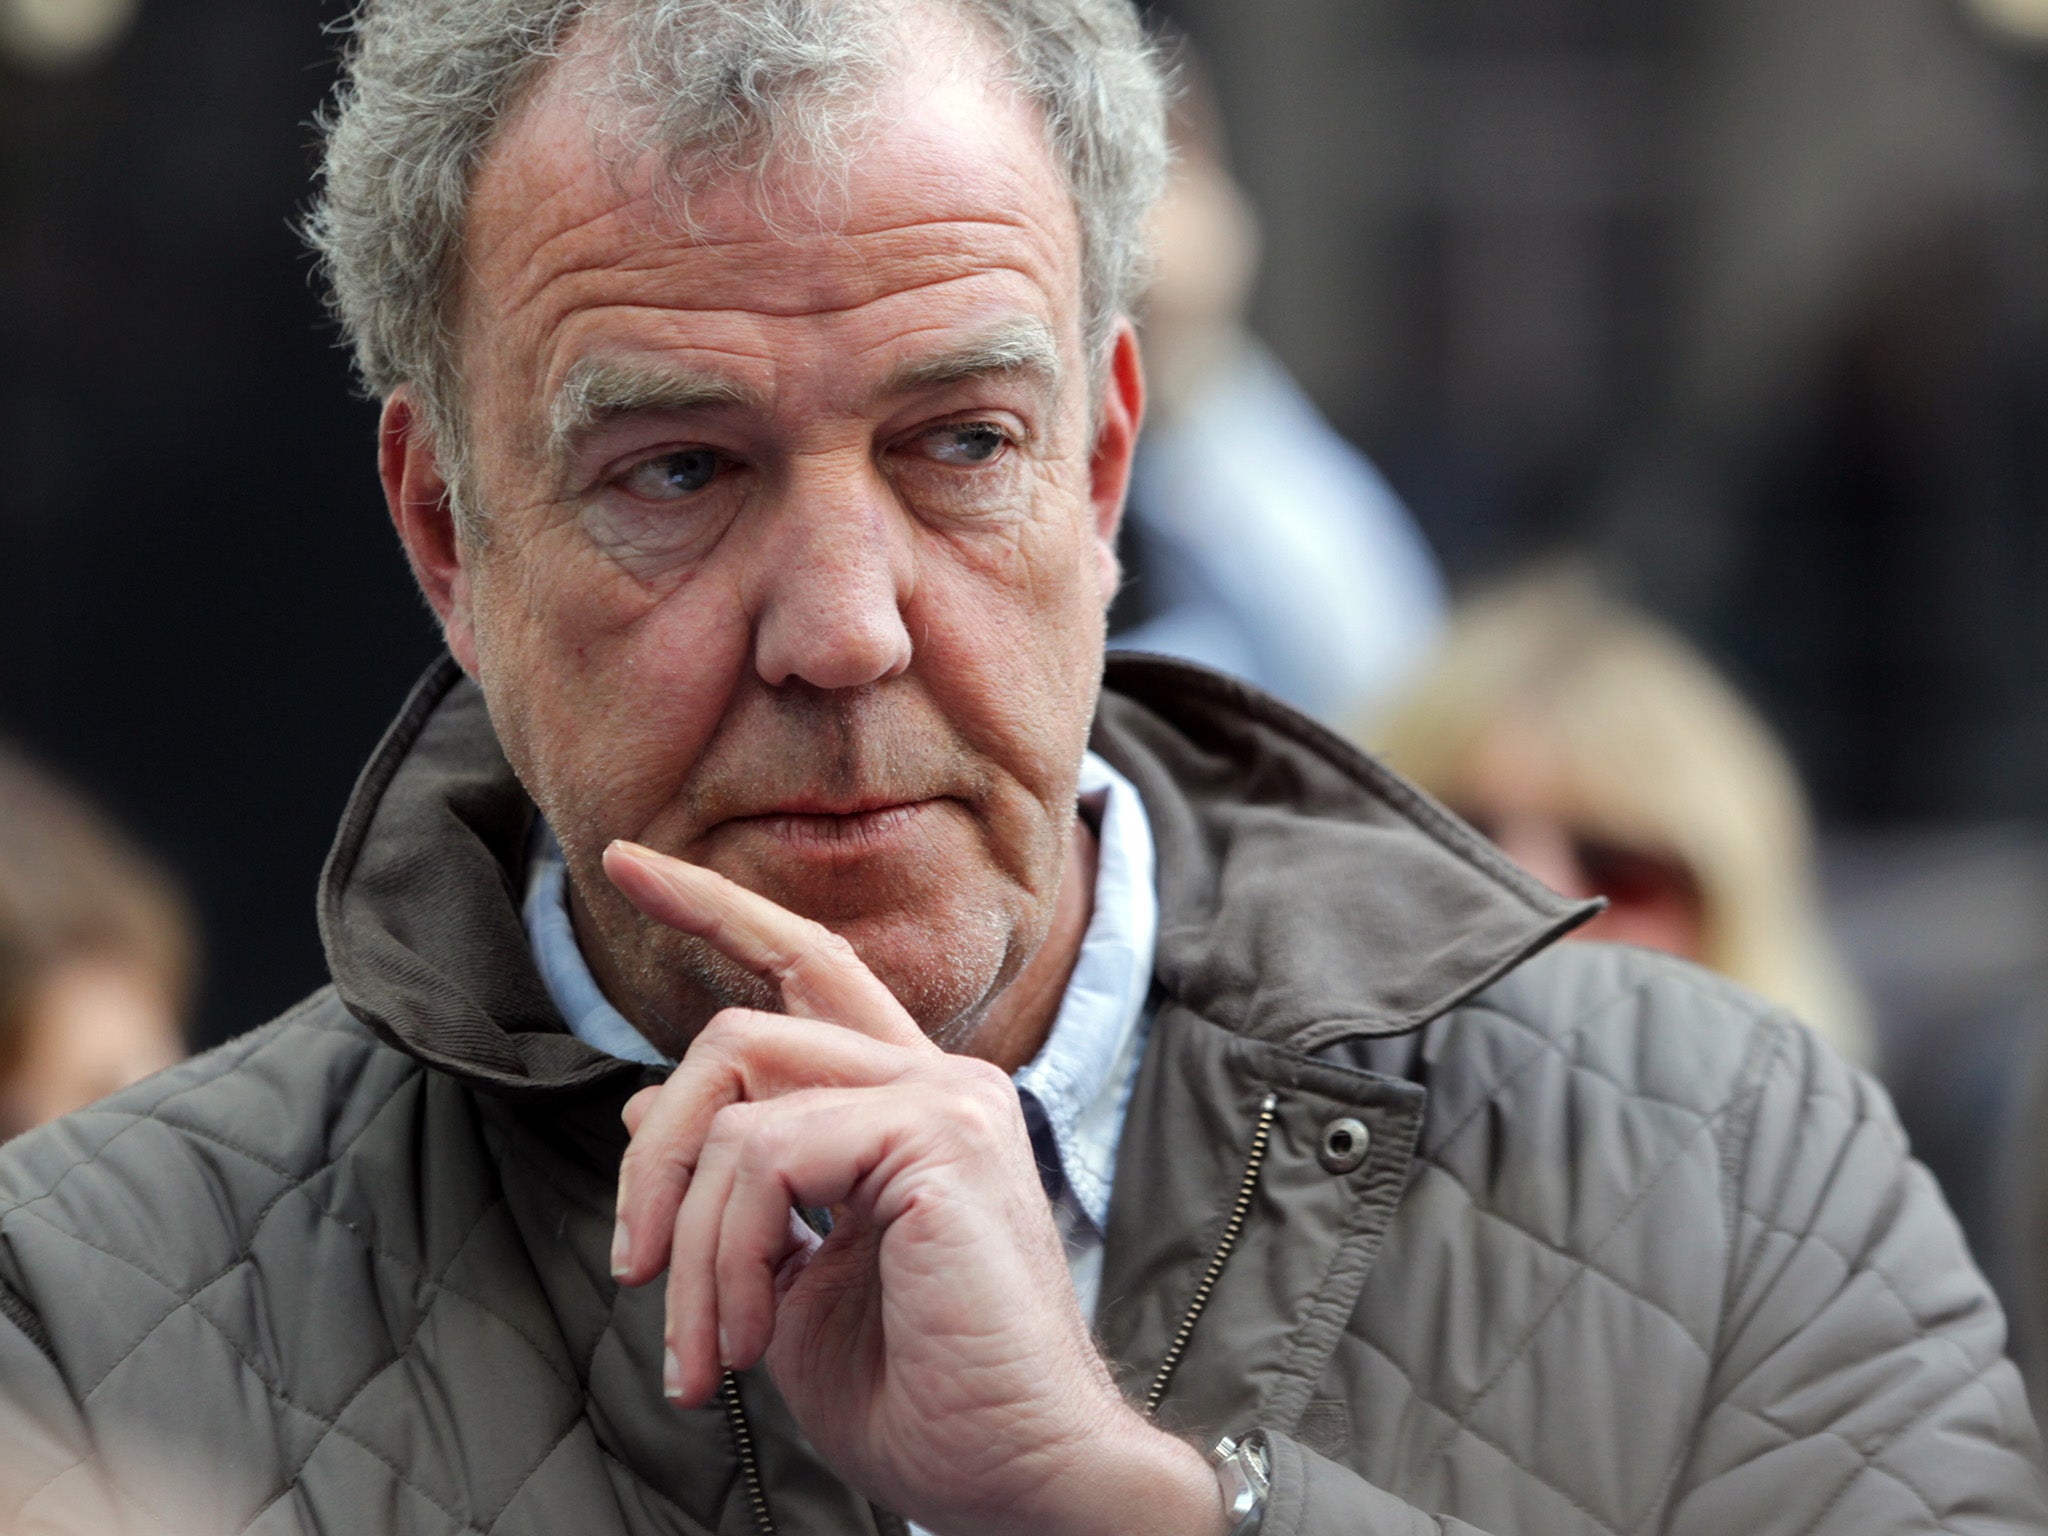 Jeremy Clarkson has shared stories about the bullying he underwent at private school